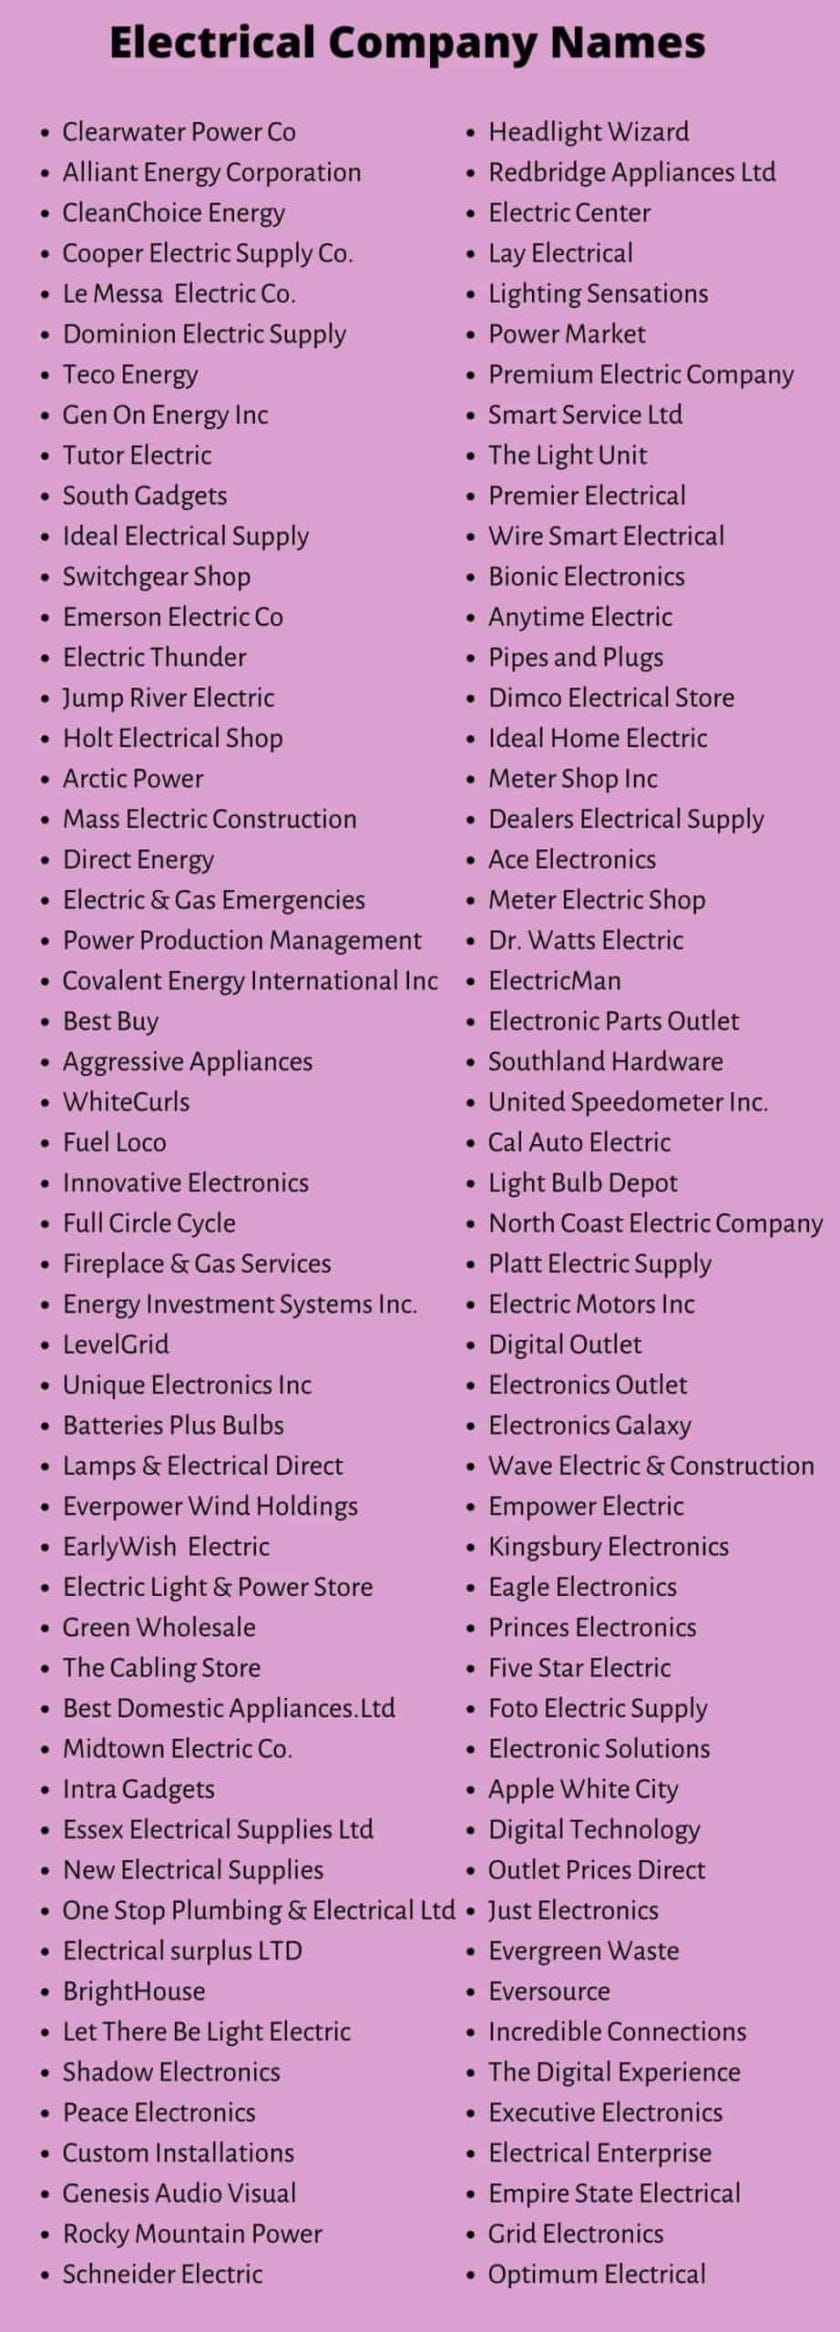 Electrical Company Names